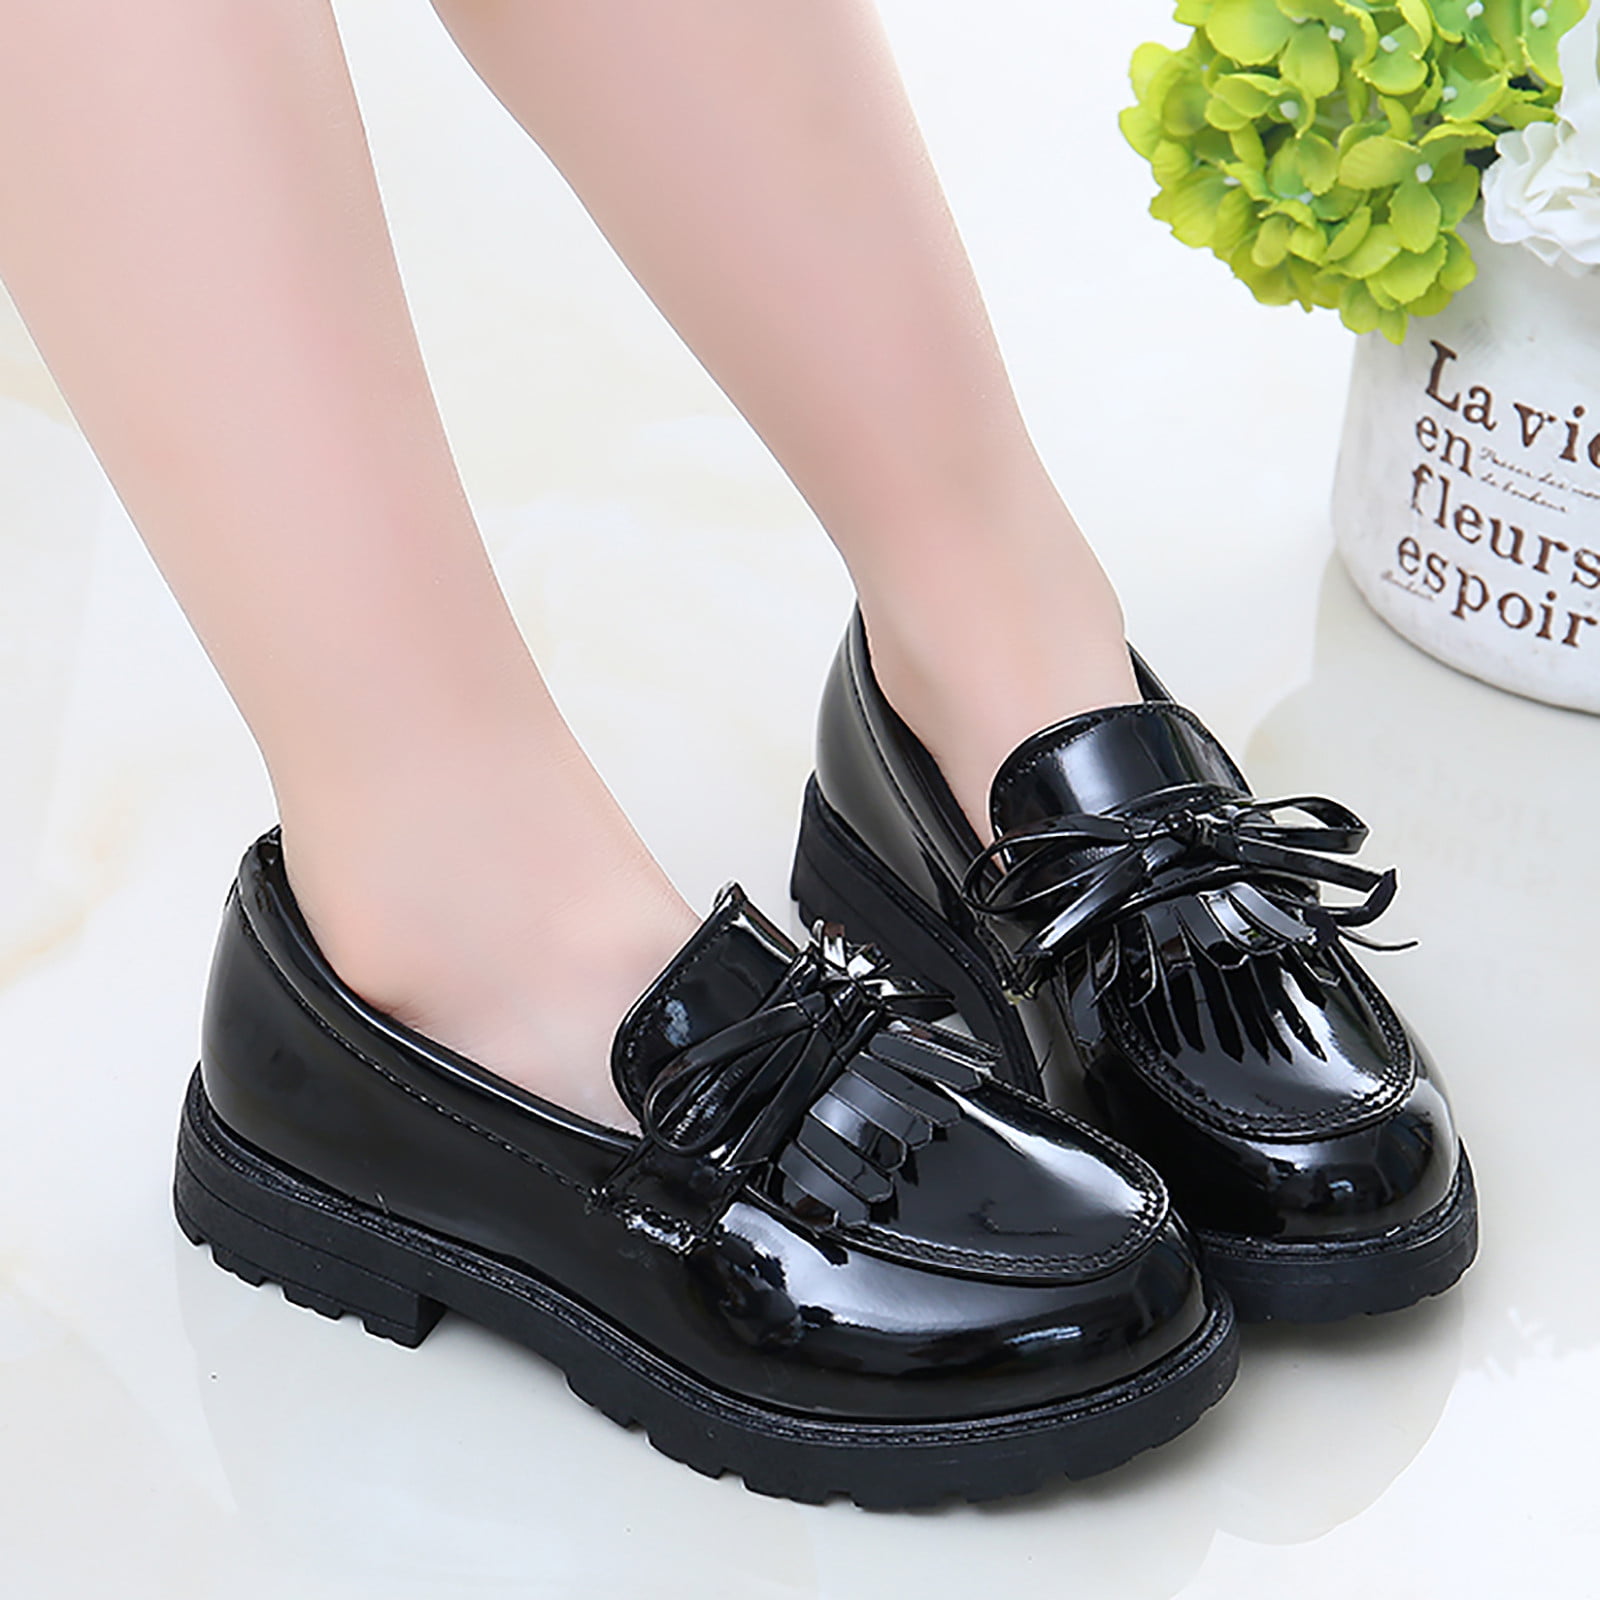 LYCAQL Toddler Shoes Girls Slip On Leather Loafer Tassel Bow School ...